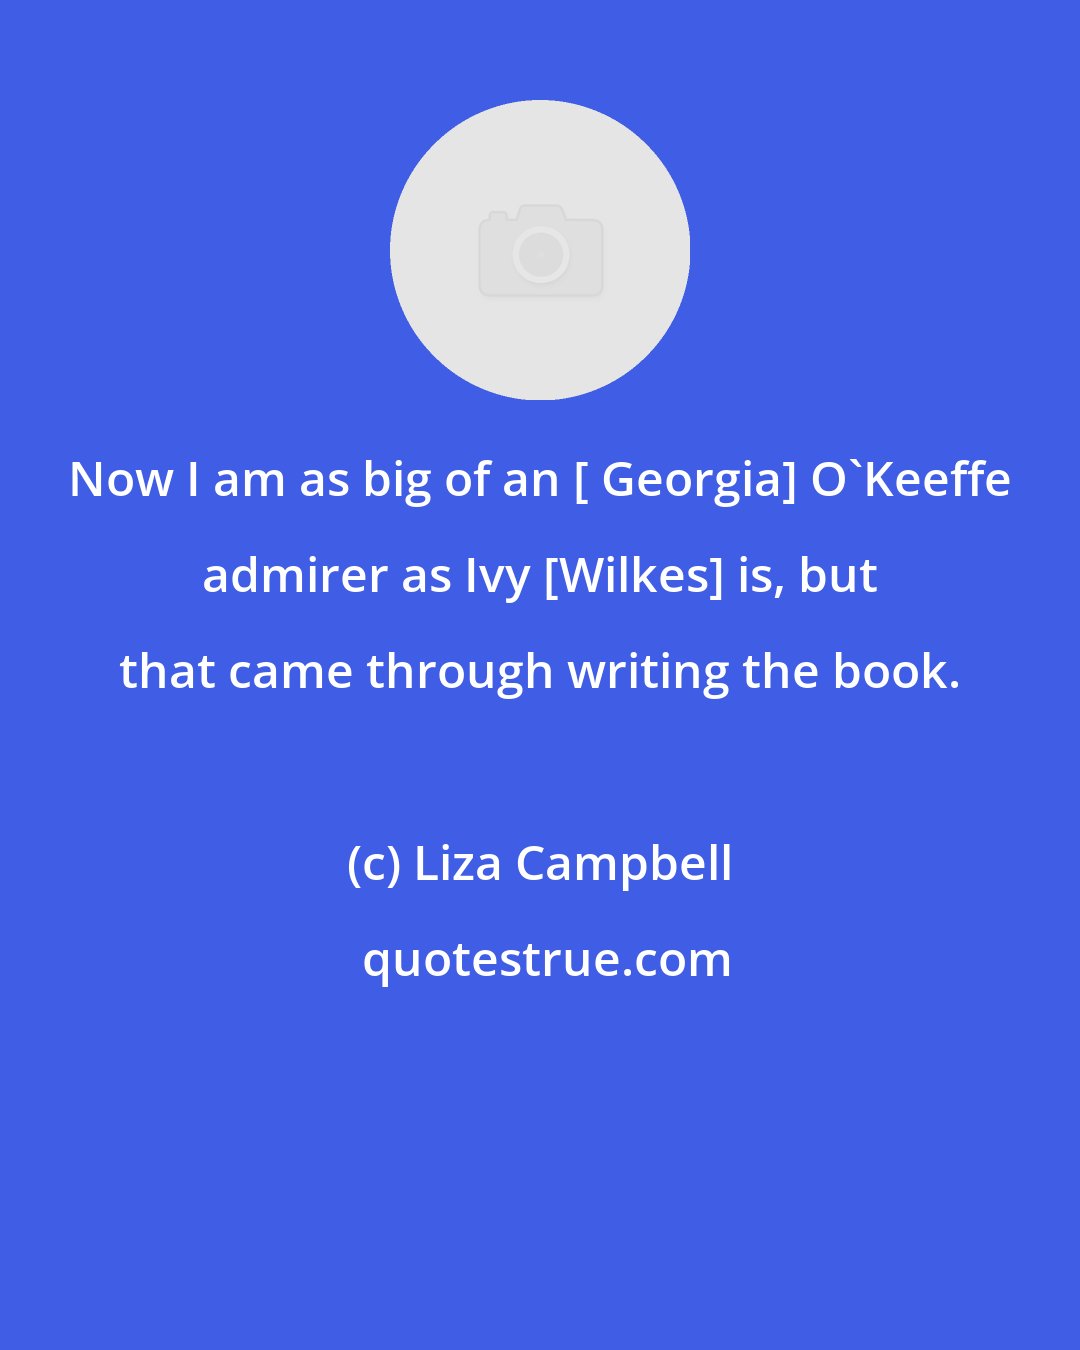 Liza Campbell: Now I am as big of an [ Georgia] O'Keeffe admirer as Ivy [Wilkes] is, but that came through writing the book.